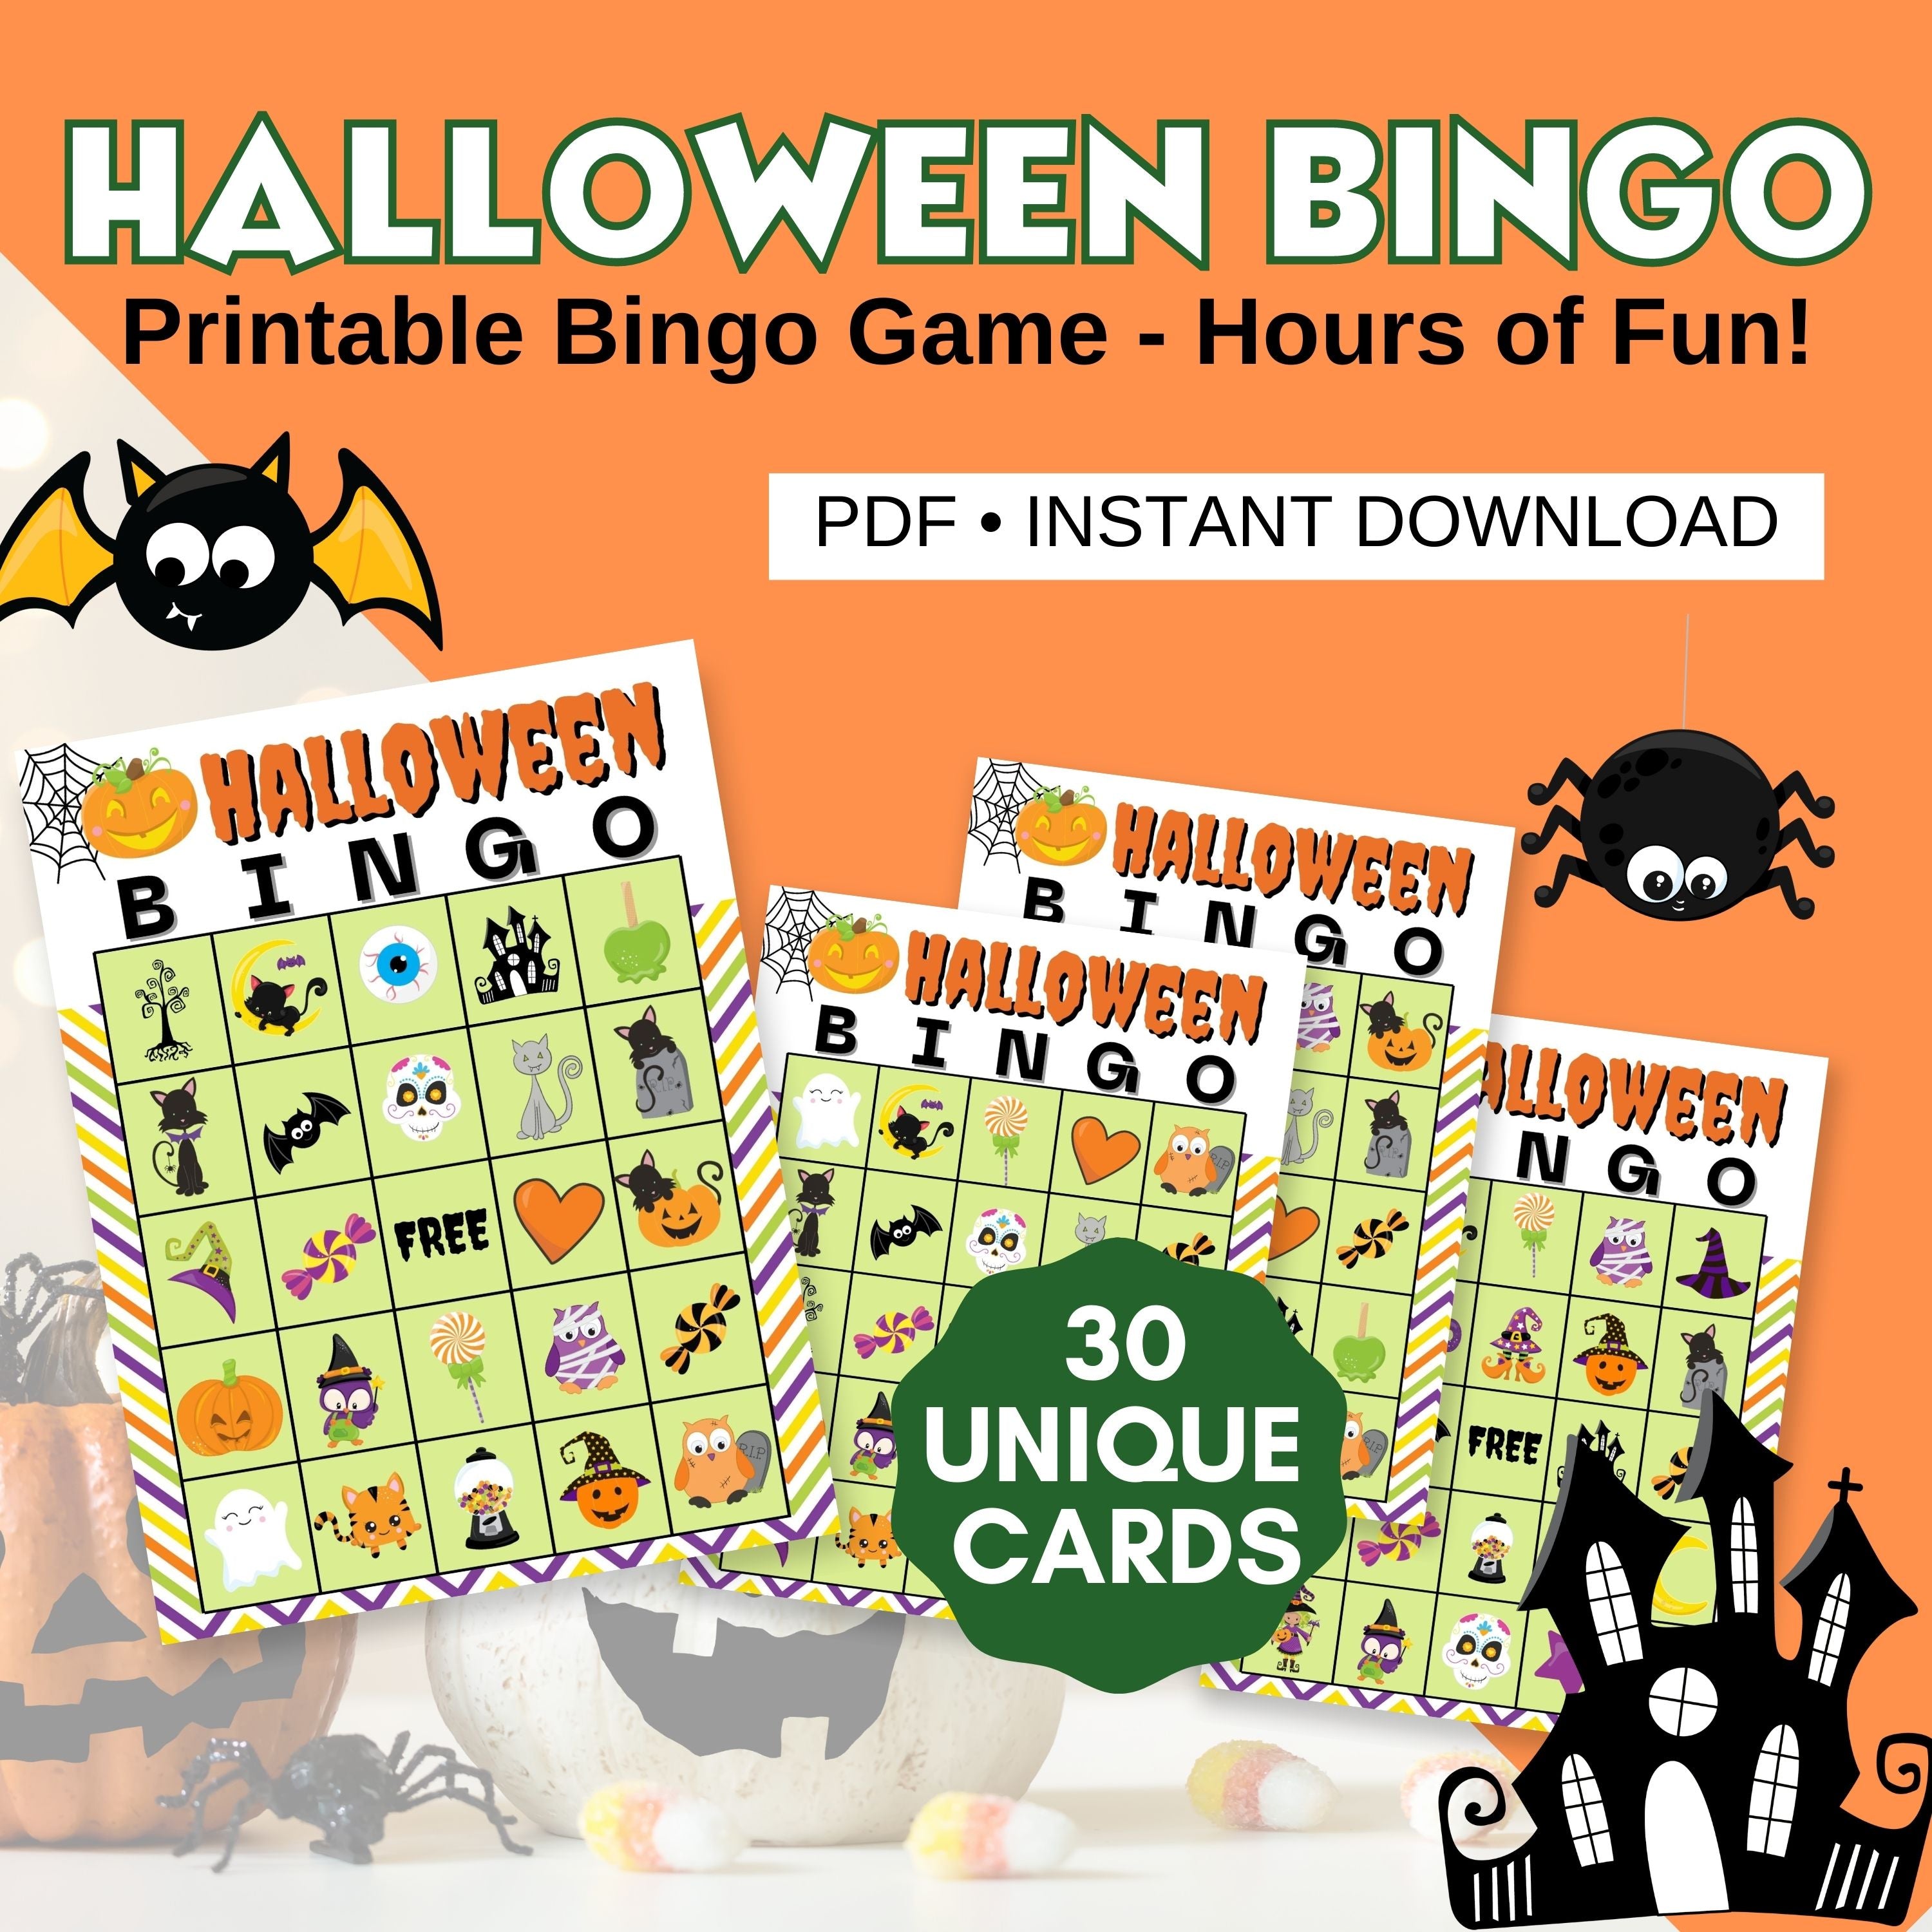 Looking for a spook-tacularly fun Halloween activity for kids? Our printable Halloween Bingo Game is just what you need! Get ready for endless entertainment with our Halloween Bingo Game package, featuring 30 unique Bingo cards filled with adorable and spooky Halloween-themed illustrations. 